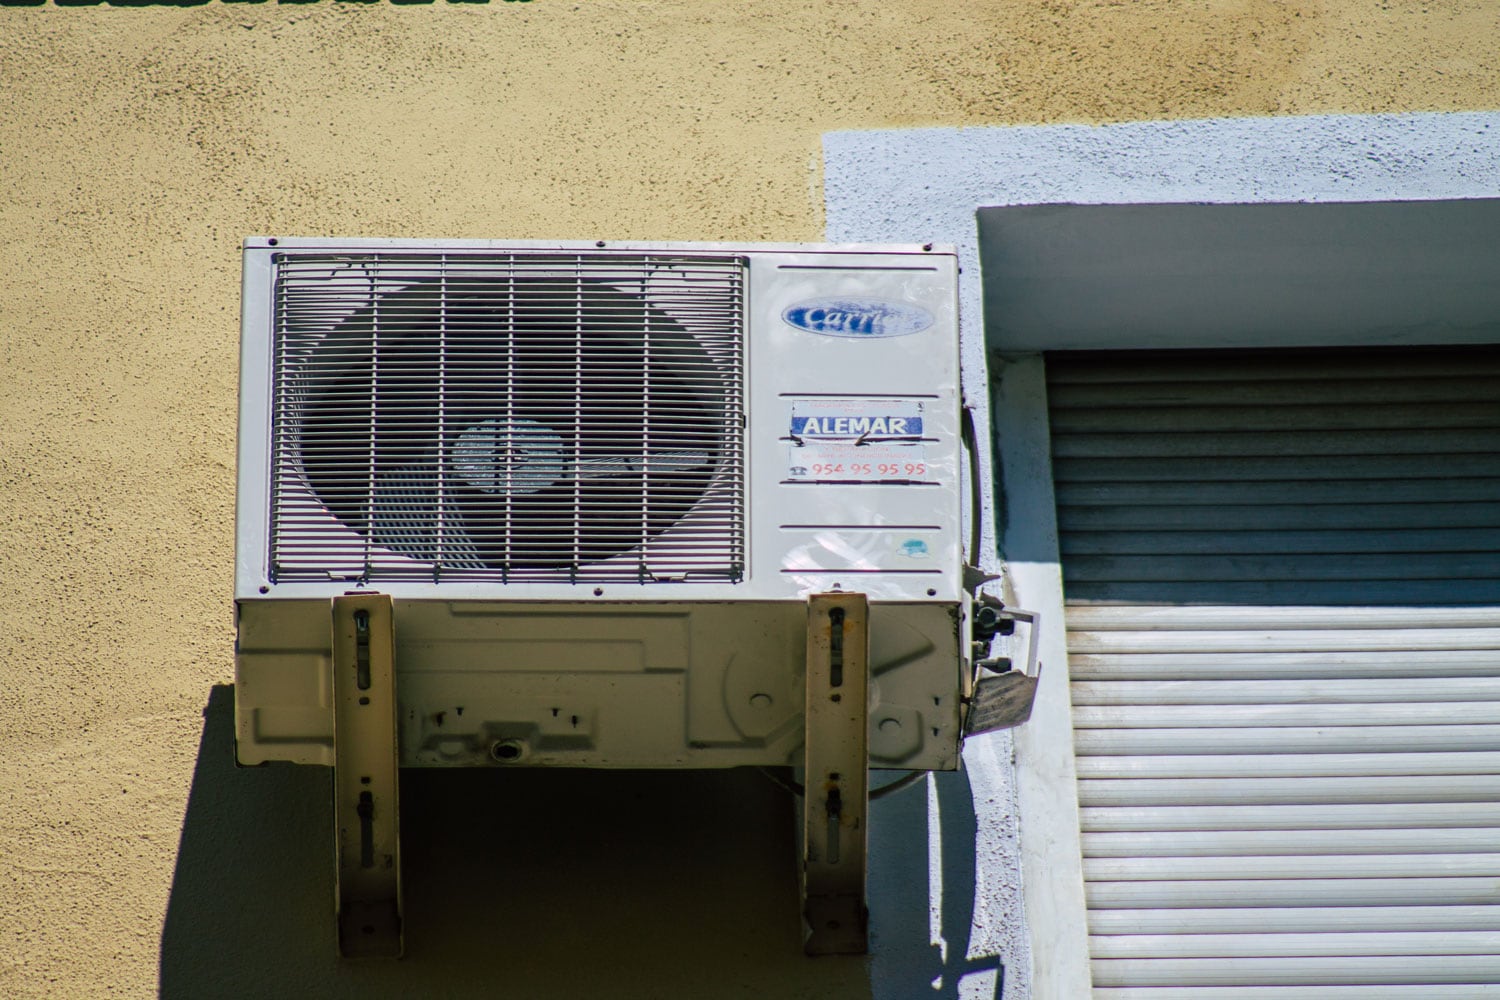 A Carrier air conditioning unit mounted on reinforced support brackets for wall mounting